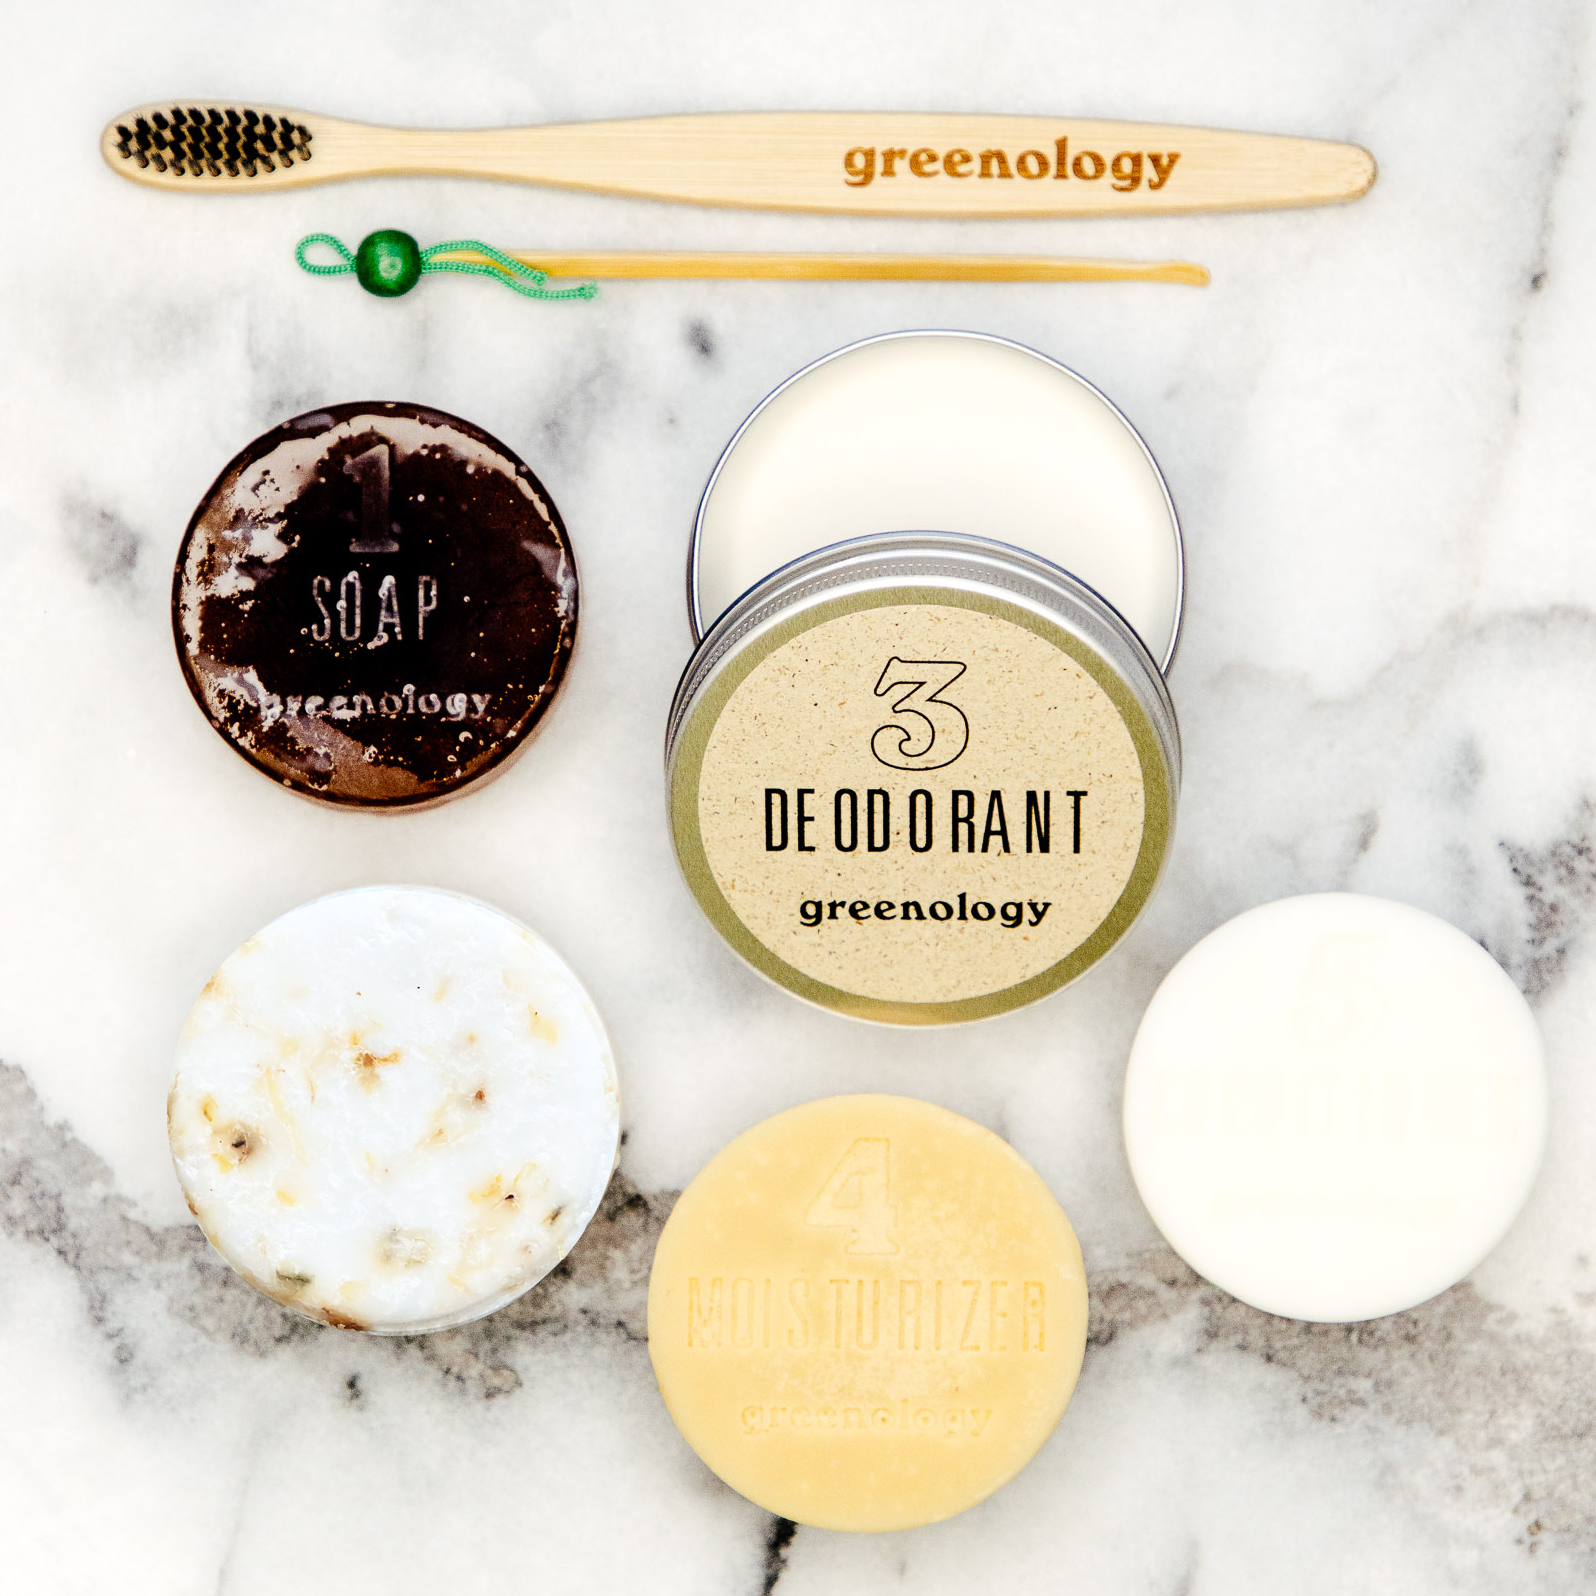 solid eco-responsible bodycare routine